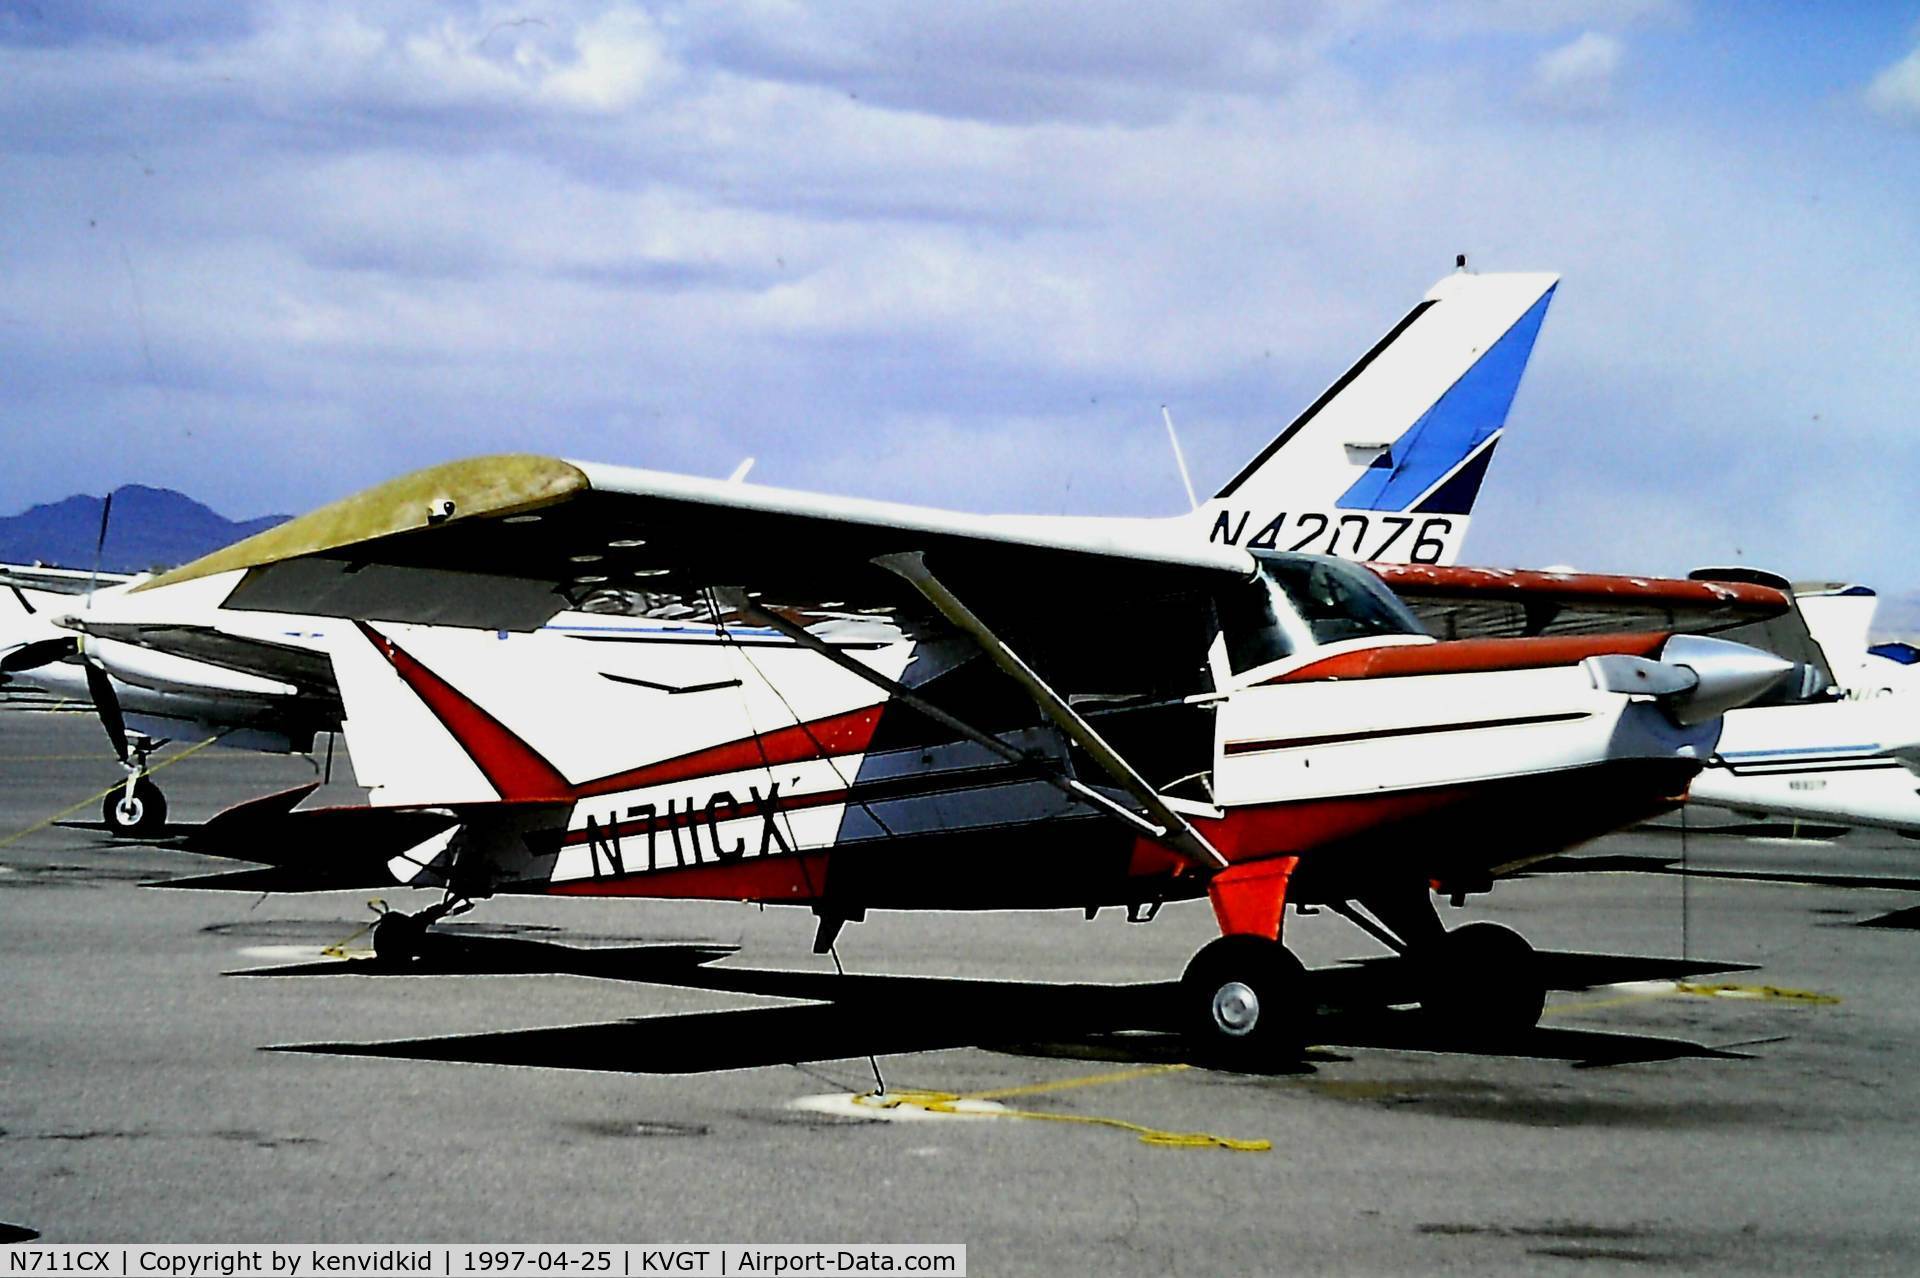 N711CX, 1980 Maule M-5-235C Lunar Rocket C/N 7342C, At North Las Vegas Airport prior to attending the Golden Air Tattoo at Nellis.